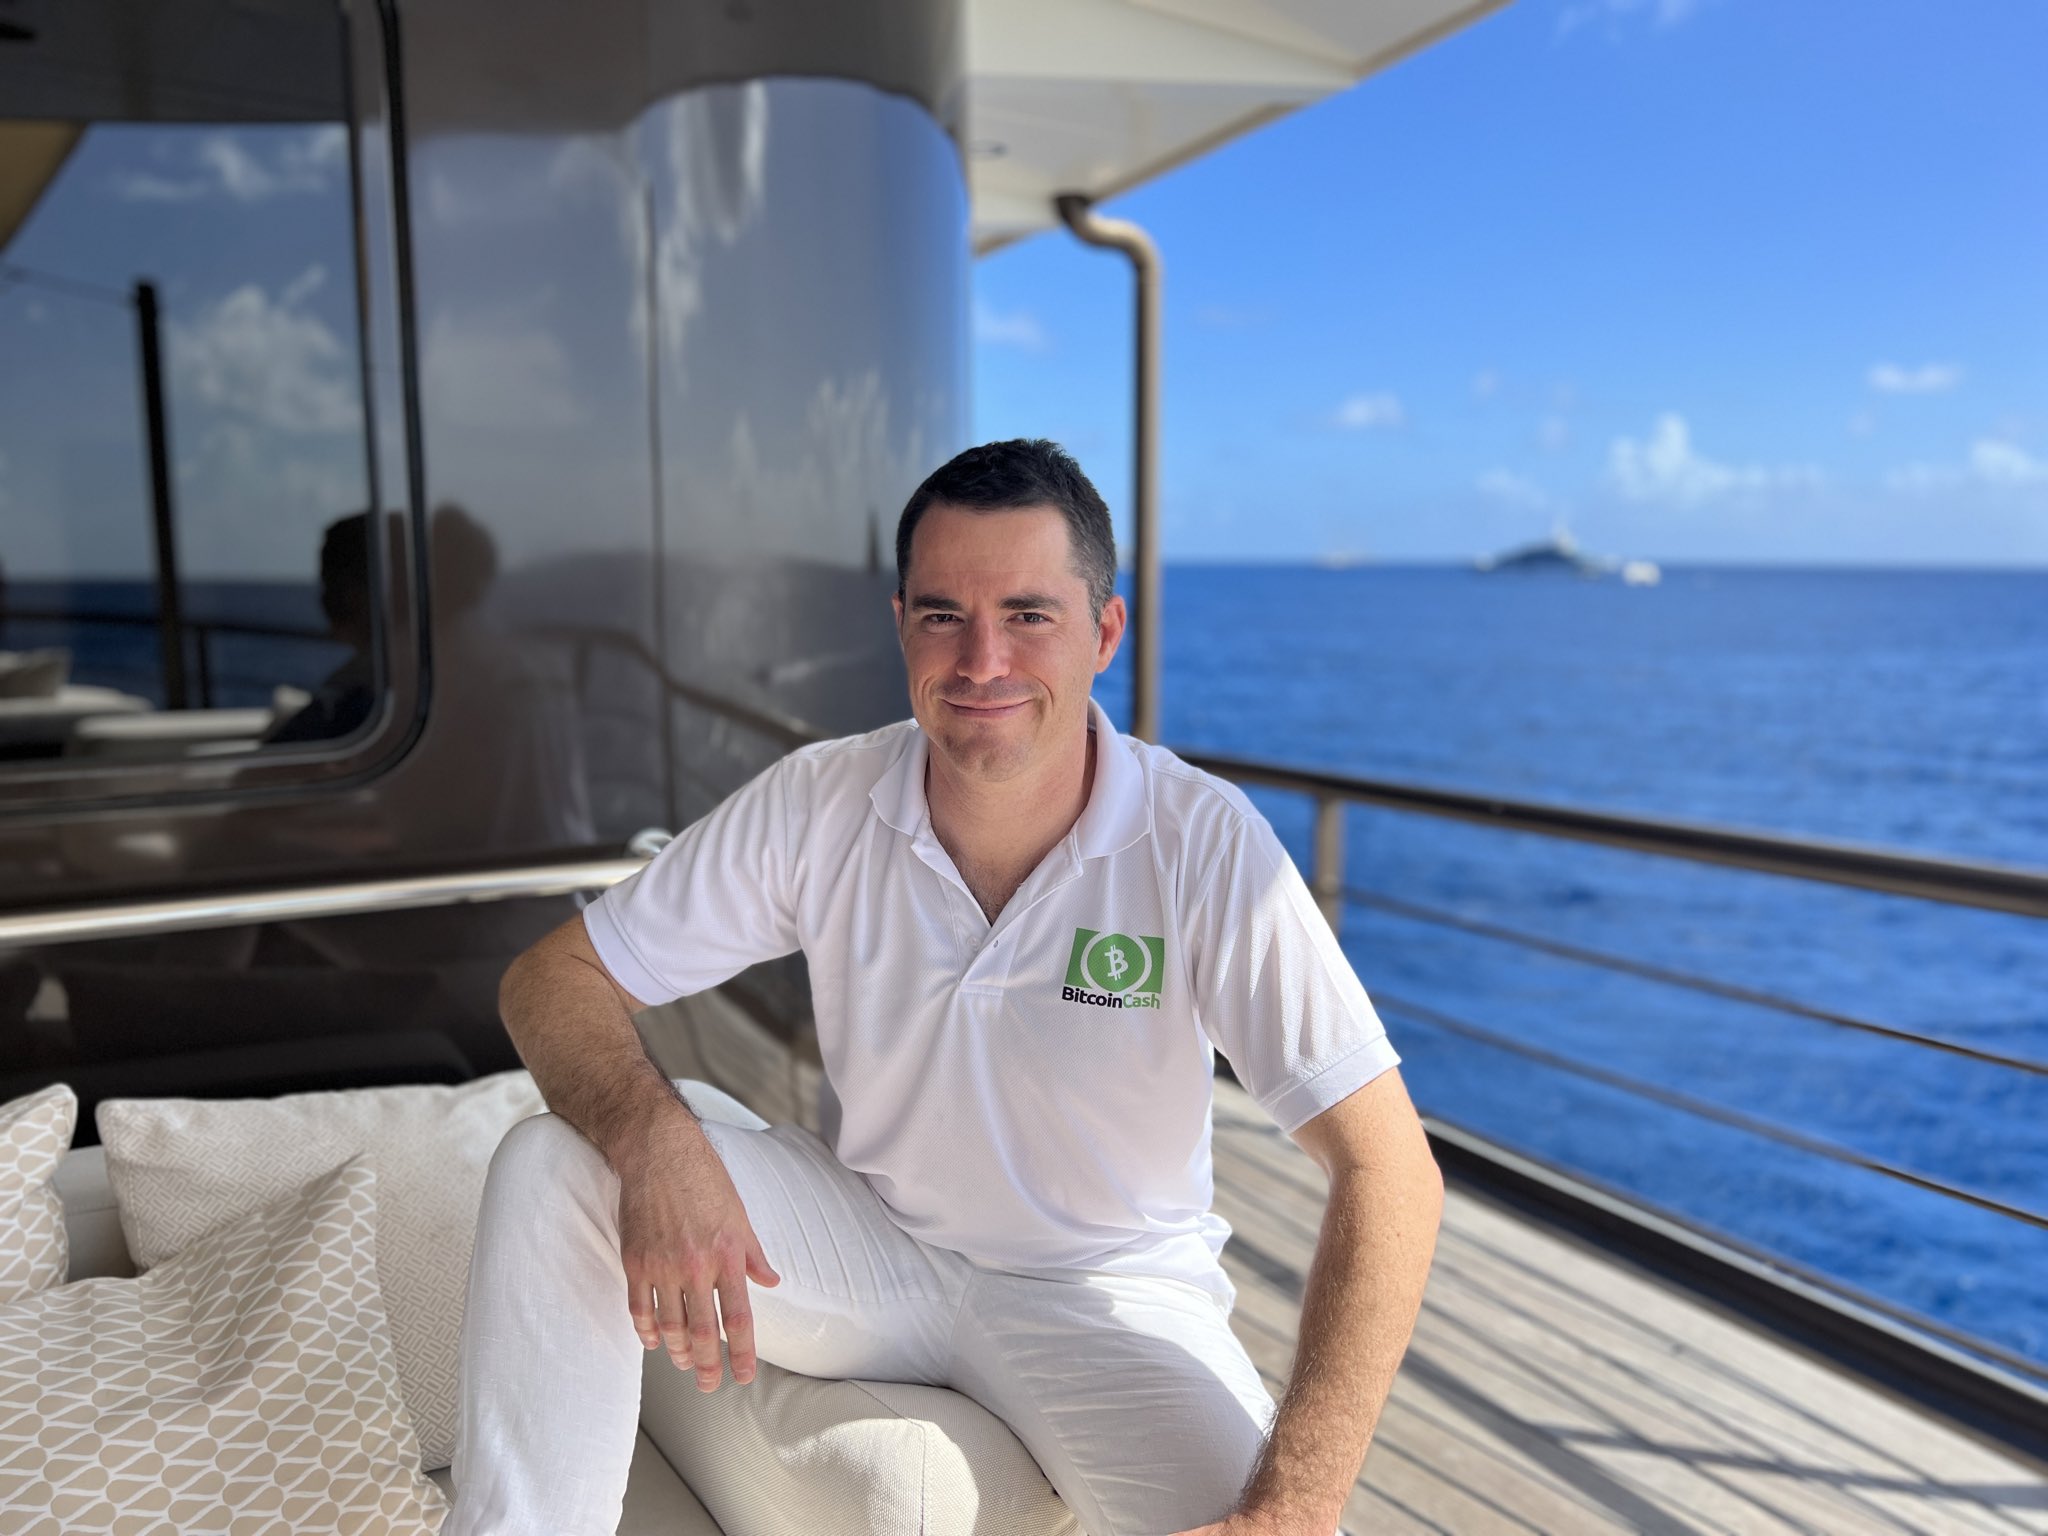 roger-ver-being-happy-and-fulfilled-is-in-your-own-life-is-one-of-the-most-attractive-traits-you-can-offer-a-partner-may-15-2023-bitcoin-cash-bch-upgrade-day